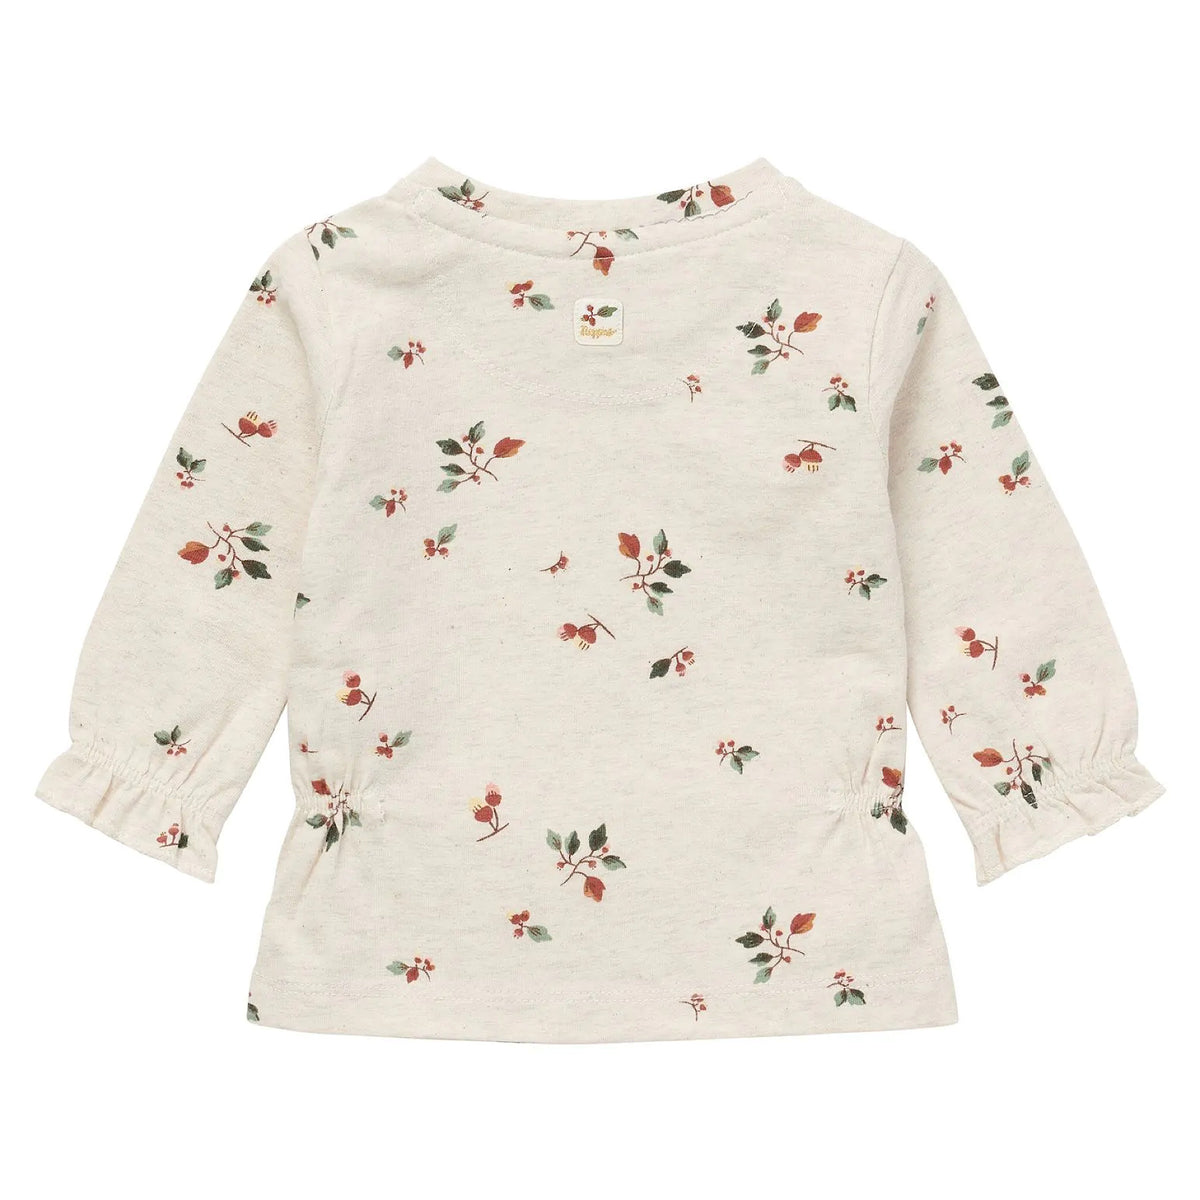 Winter Floral Top with Gathered Waist